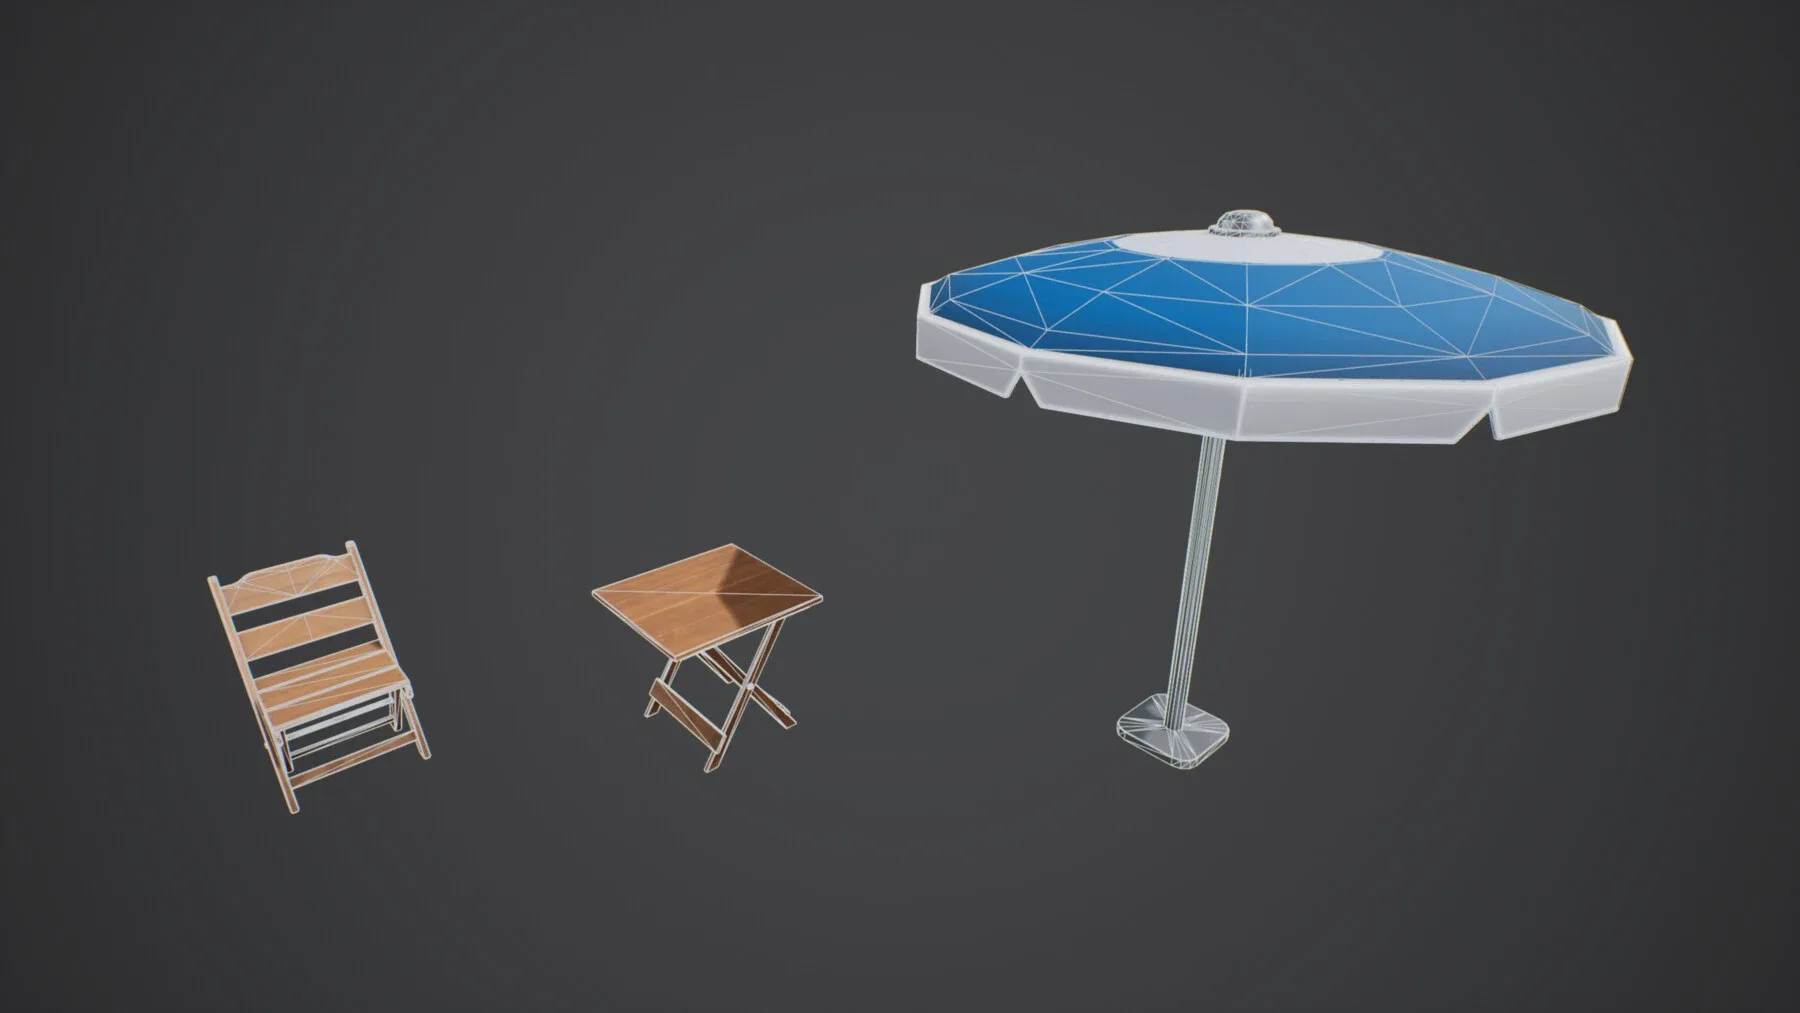 Stylized Chair, Table and Umbrella